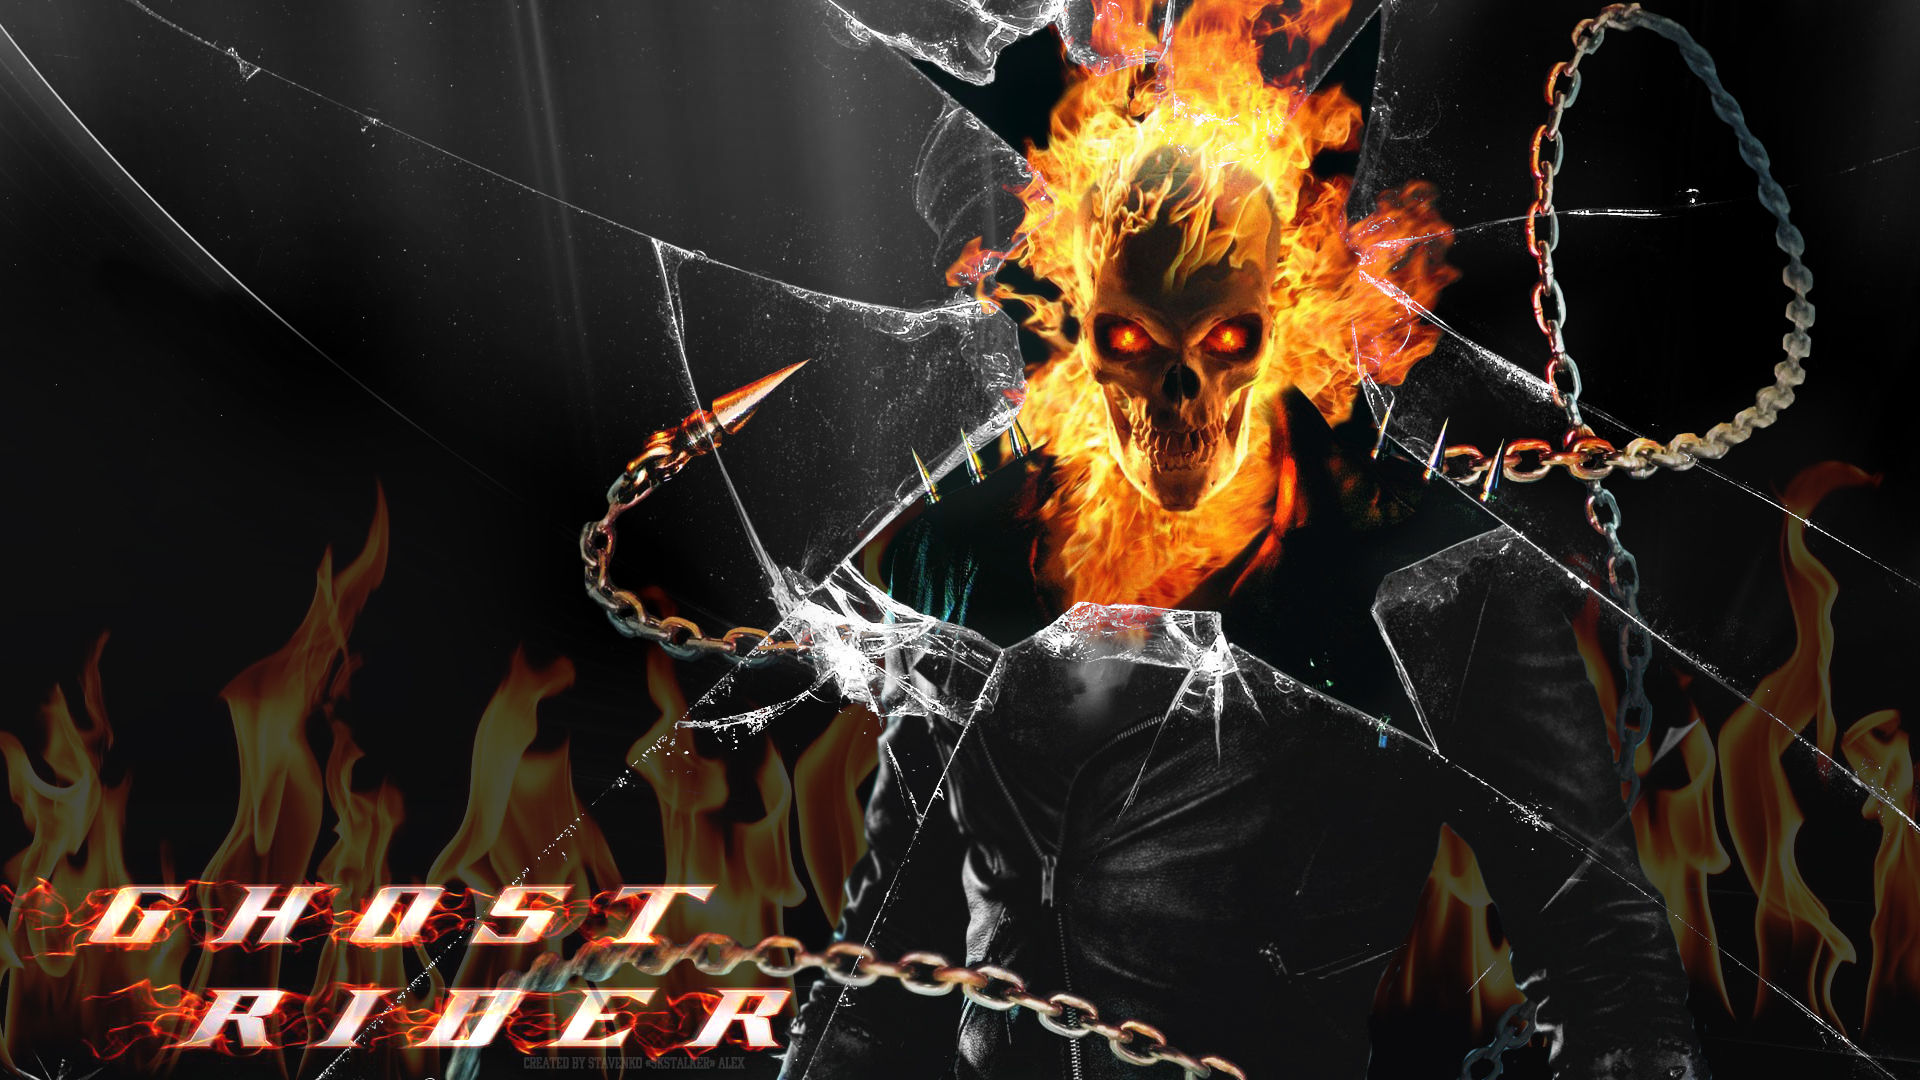 The Ghost Rider Image HD Wallpaper And